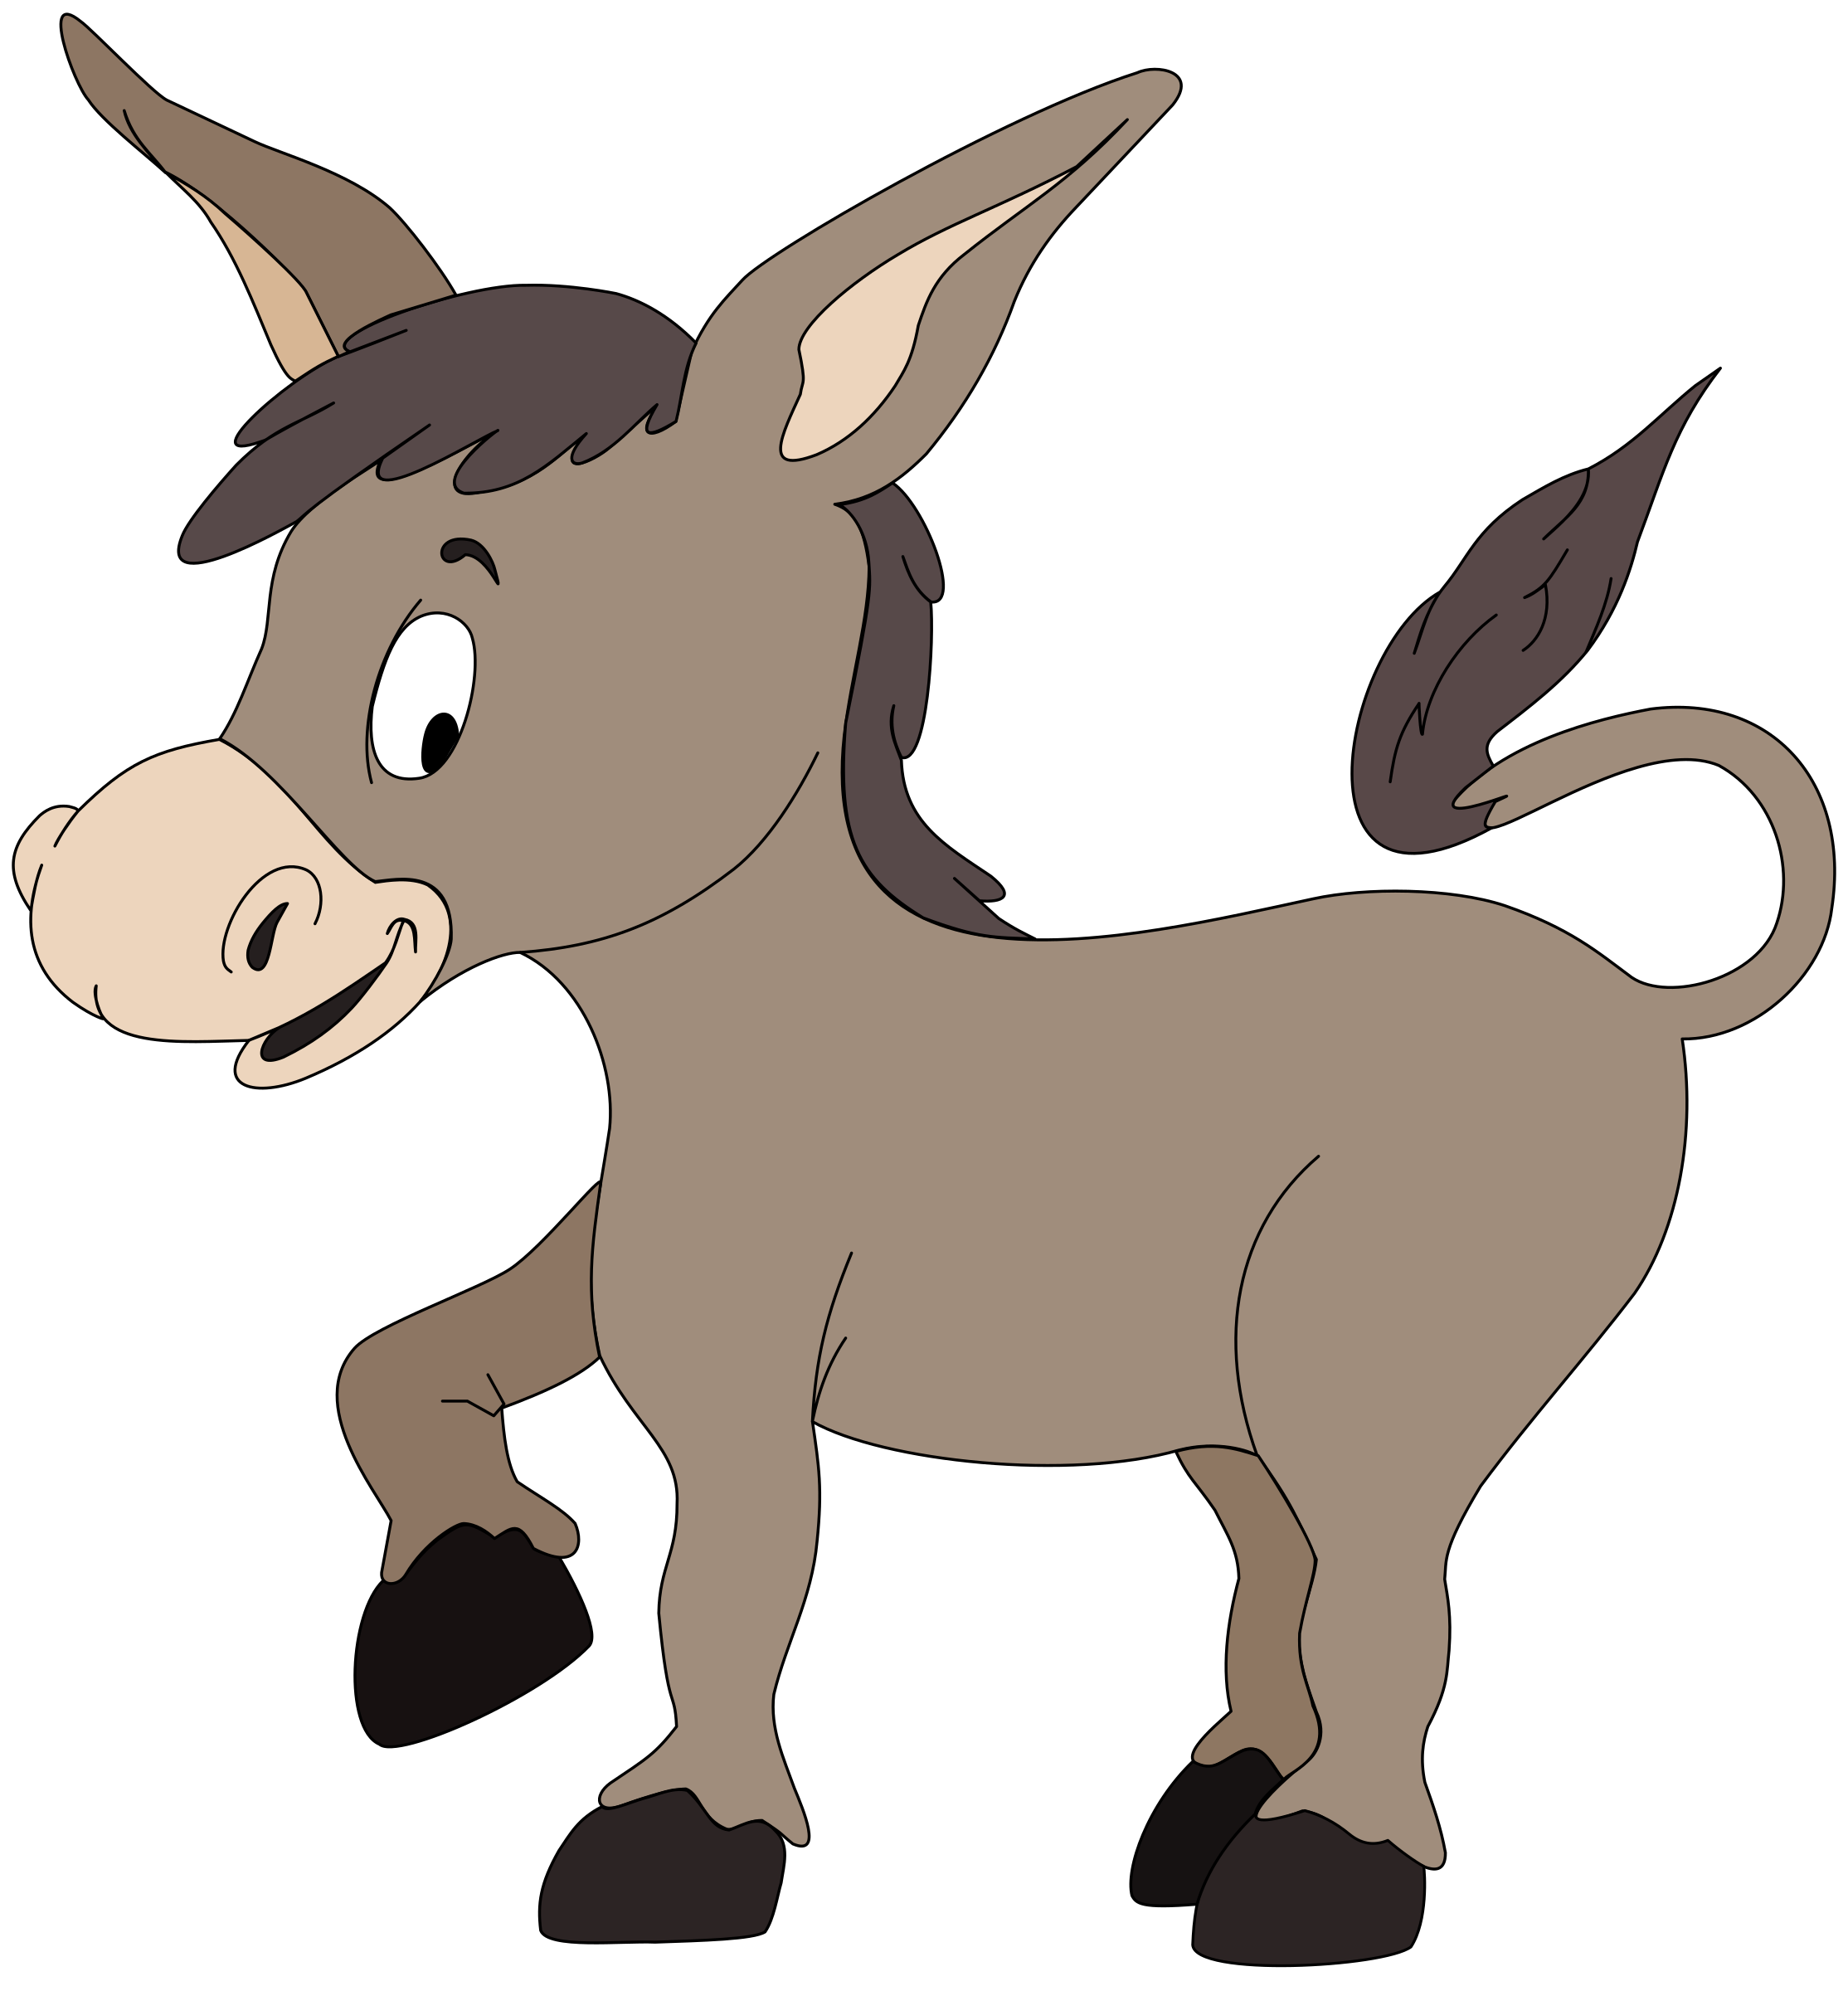 Longhorn clipart donkey. White background images all